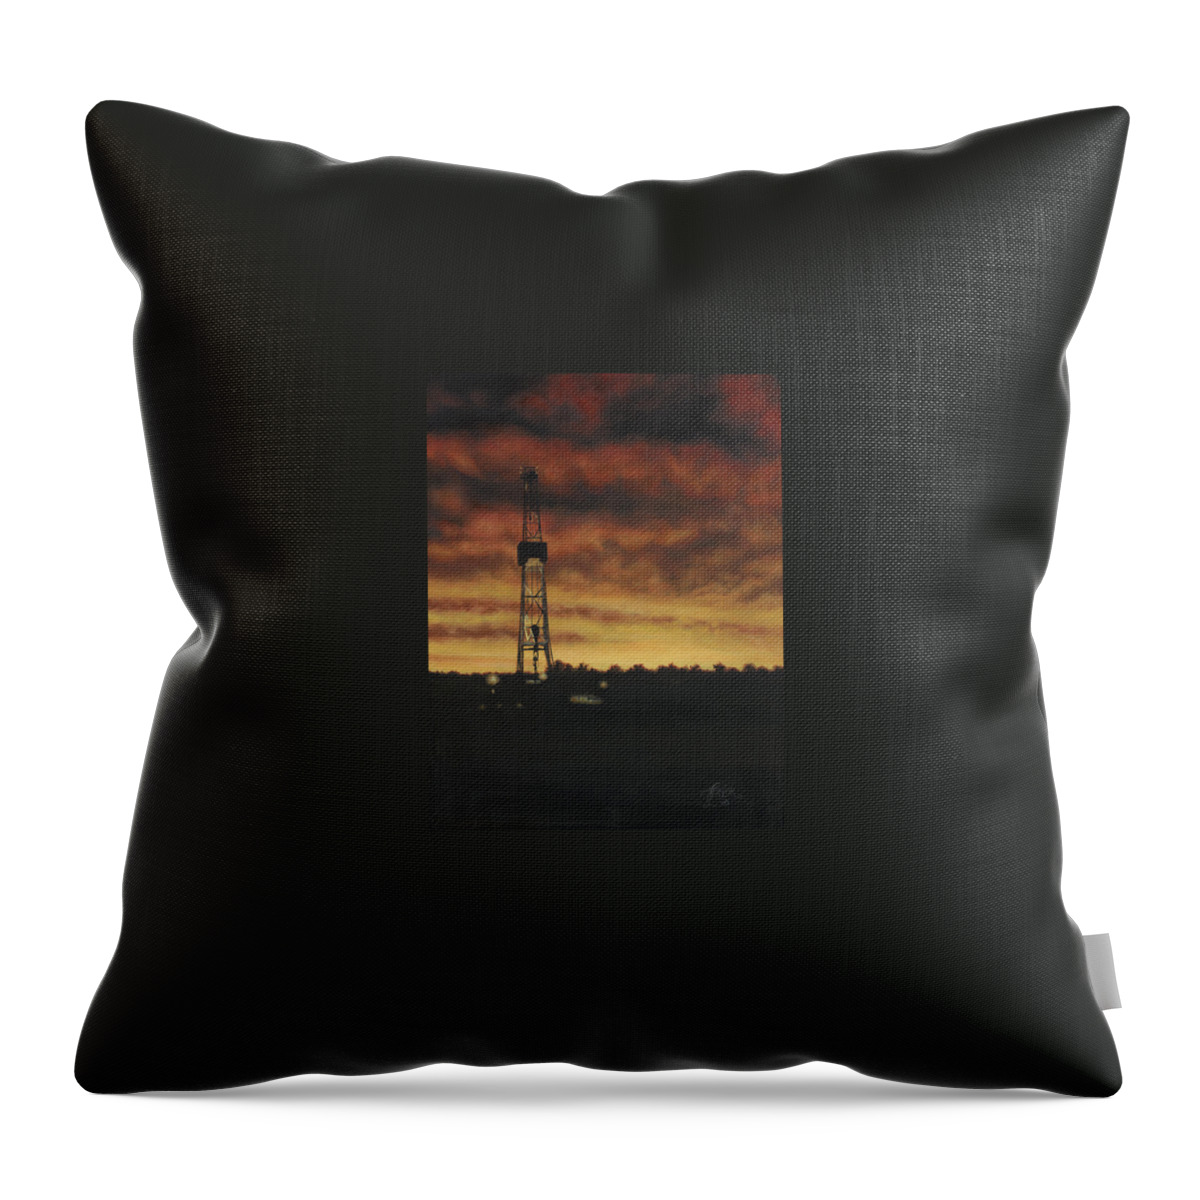 Drilling Rig In Sunset Throw Pillow featuring the painting All Lit Up by Tammy Taylor